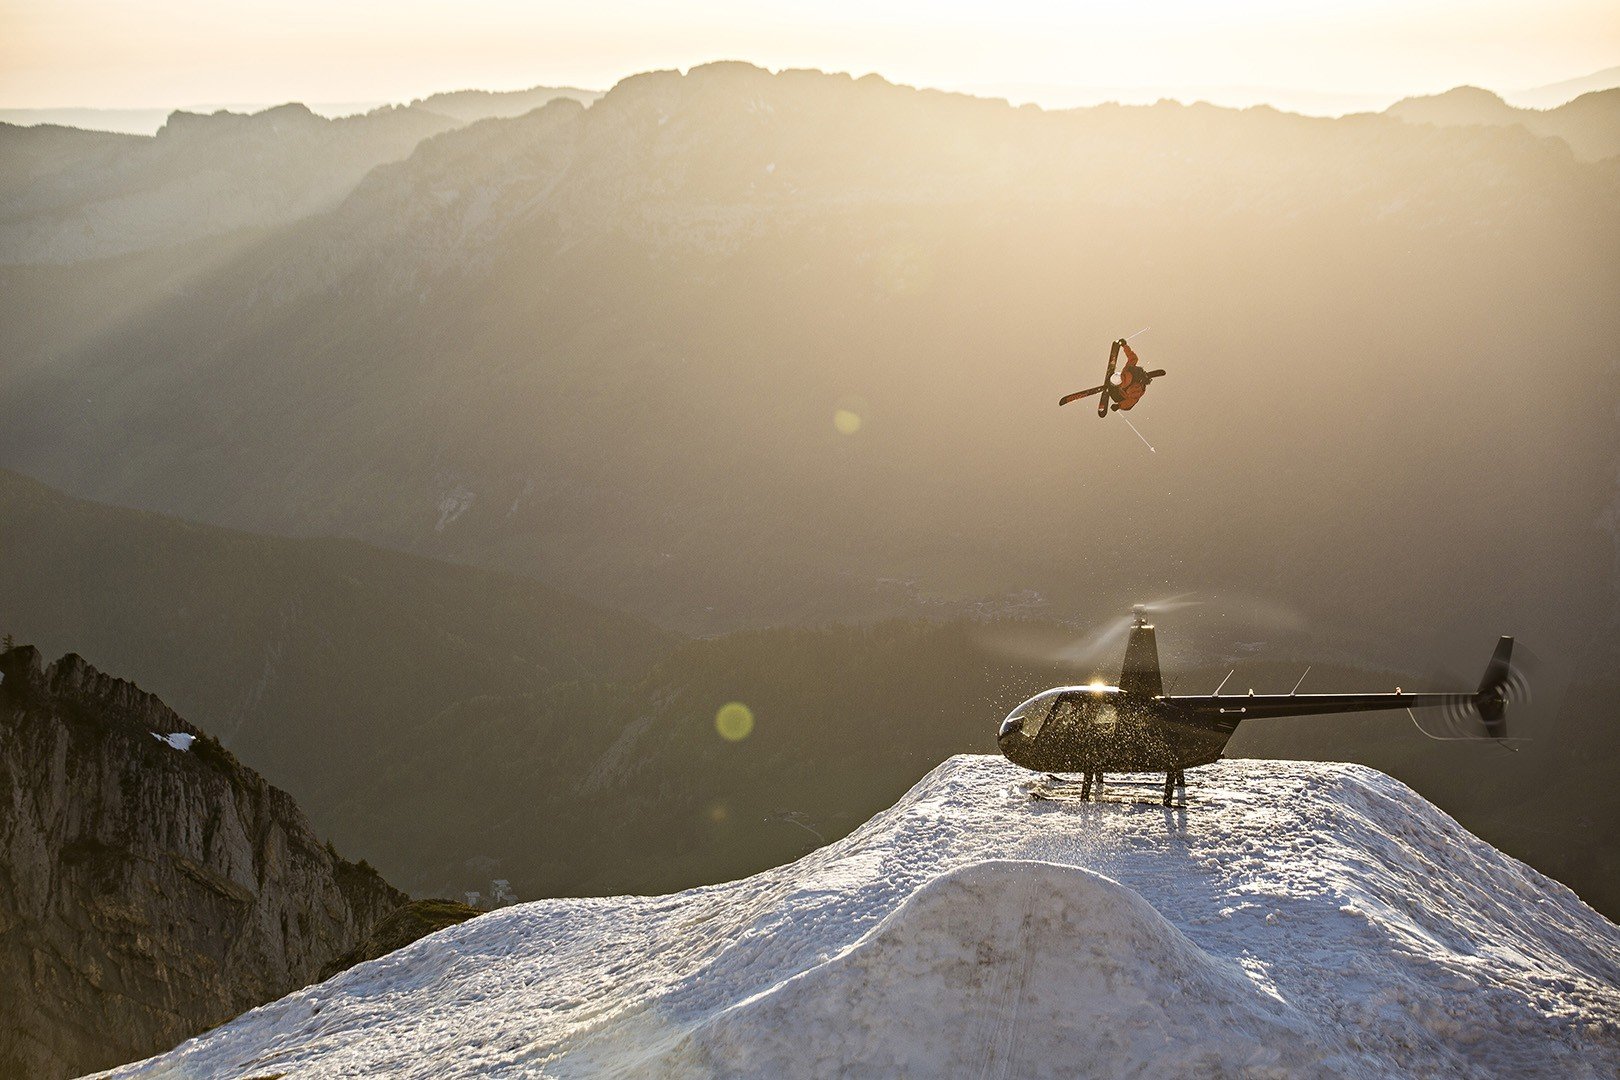 Candide Thovex, Helicopters, Skiing, Skis, Snow Wallpaper